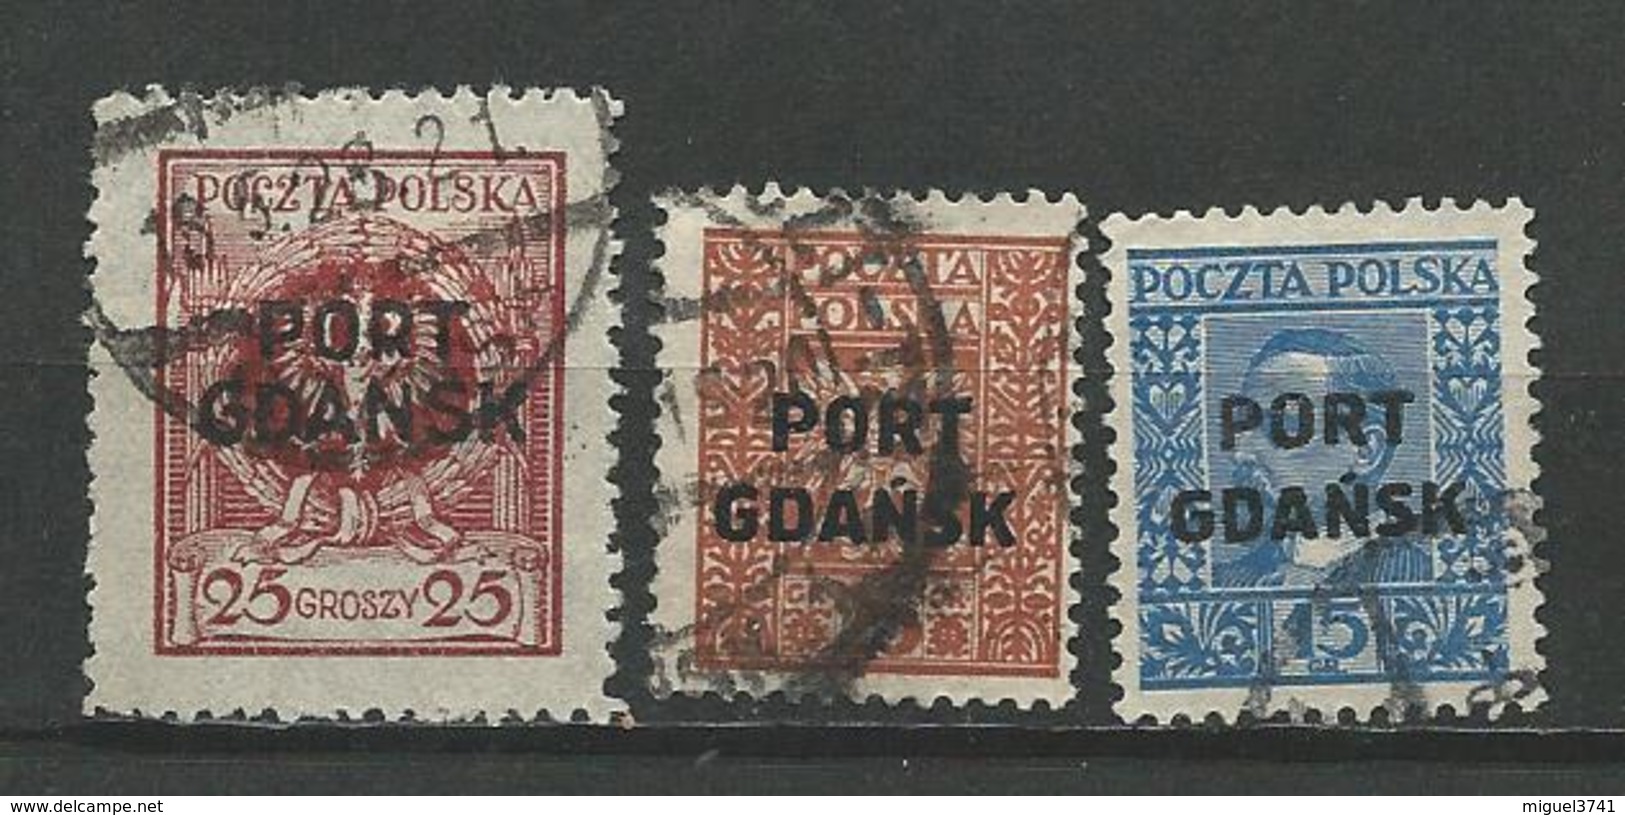 POLOGNE  ANNEE 1924  - 3 TIMBRES SURCHARGE PORT GDANSK OBLITERE VOIR SCAN - Used Stamps